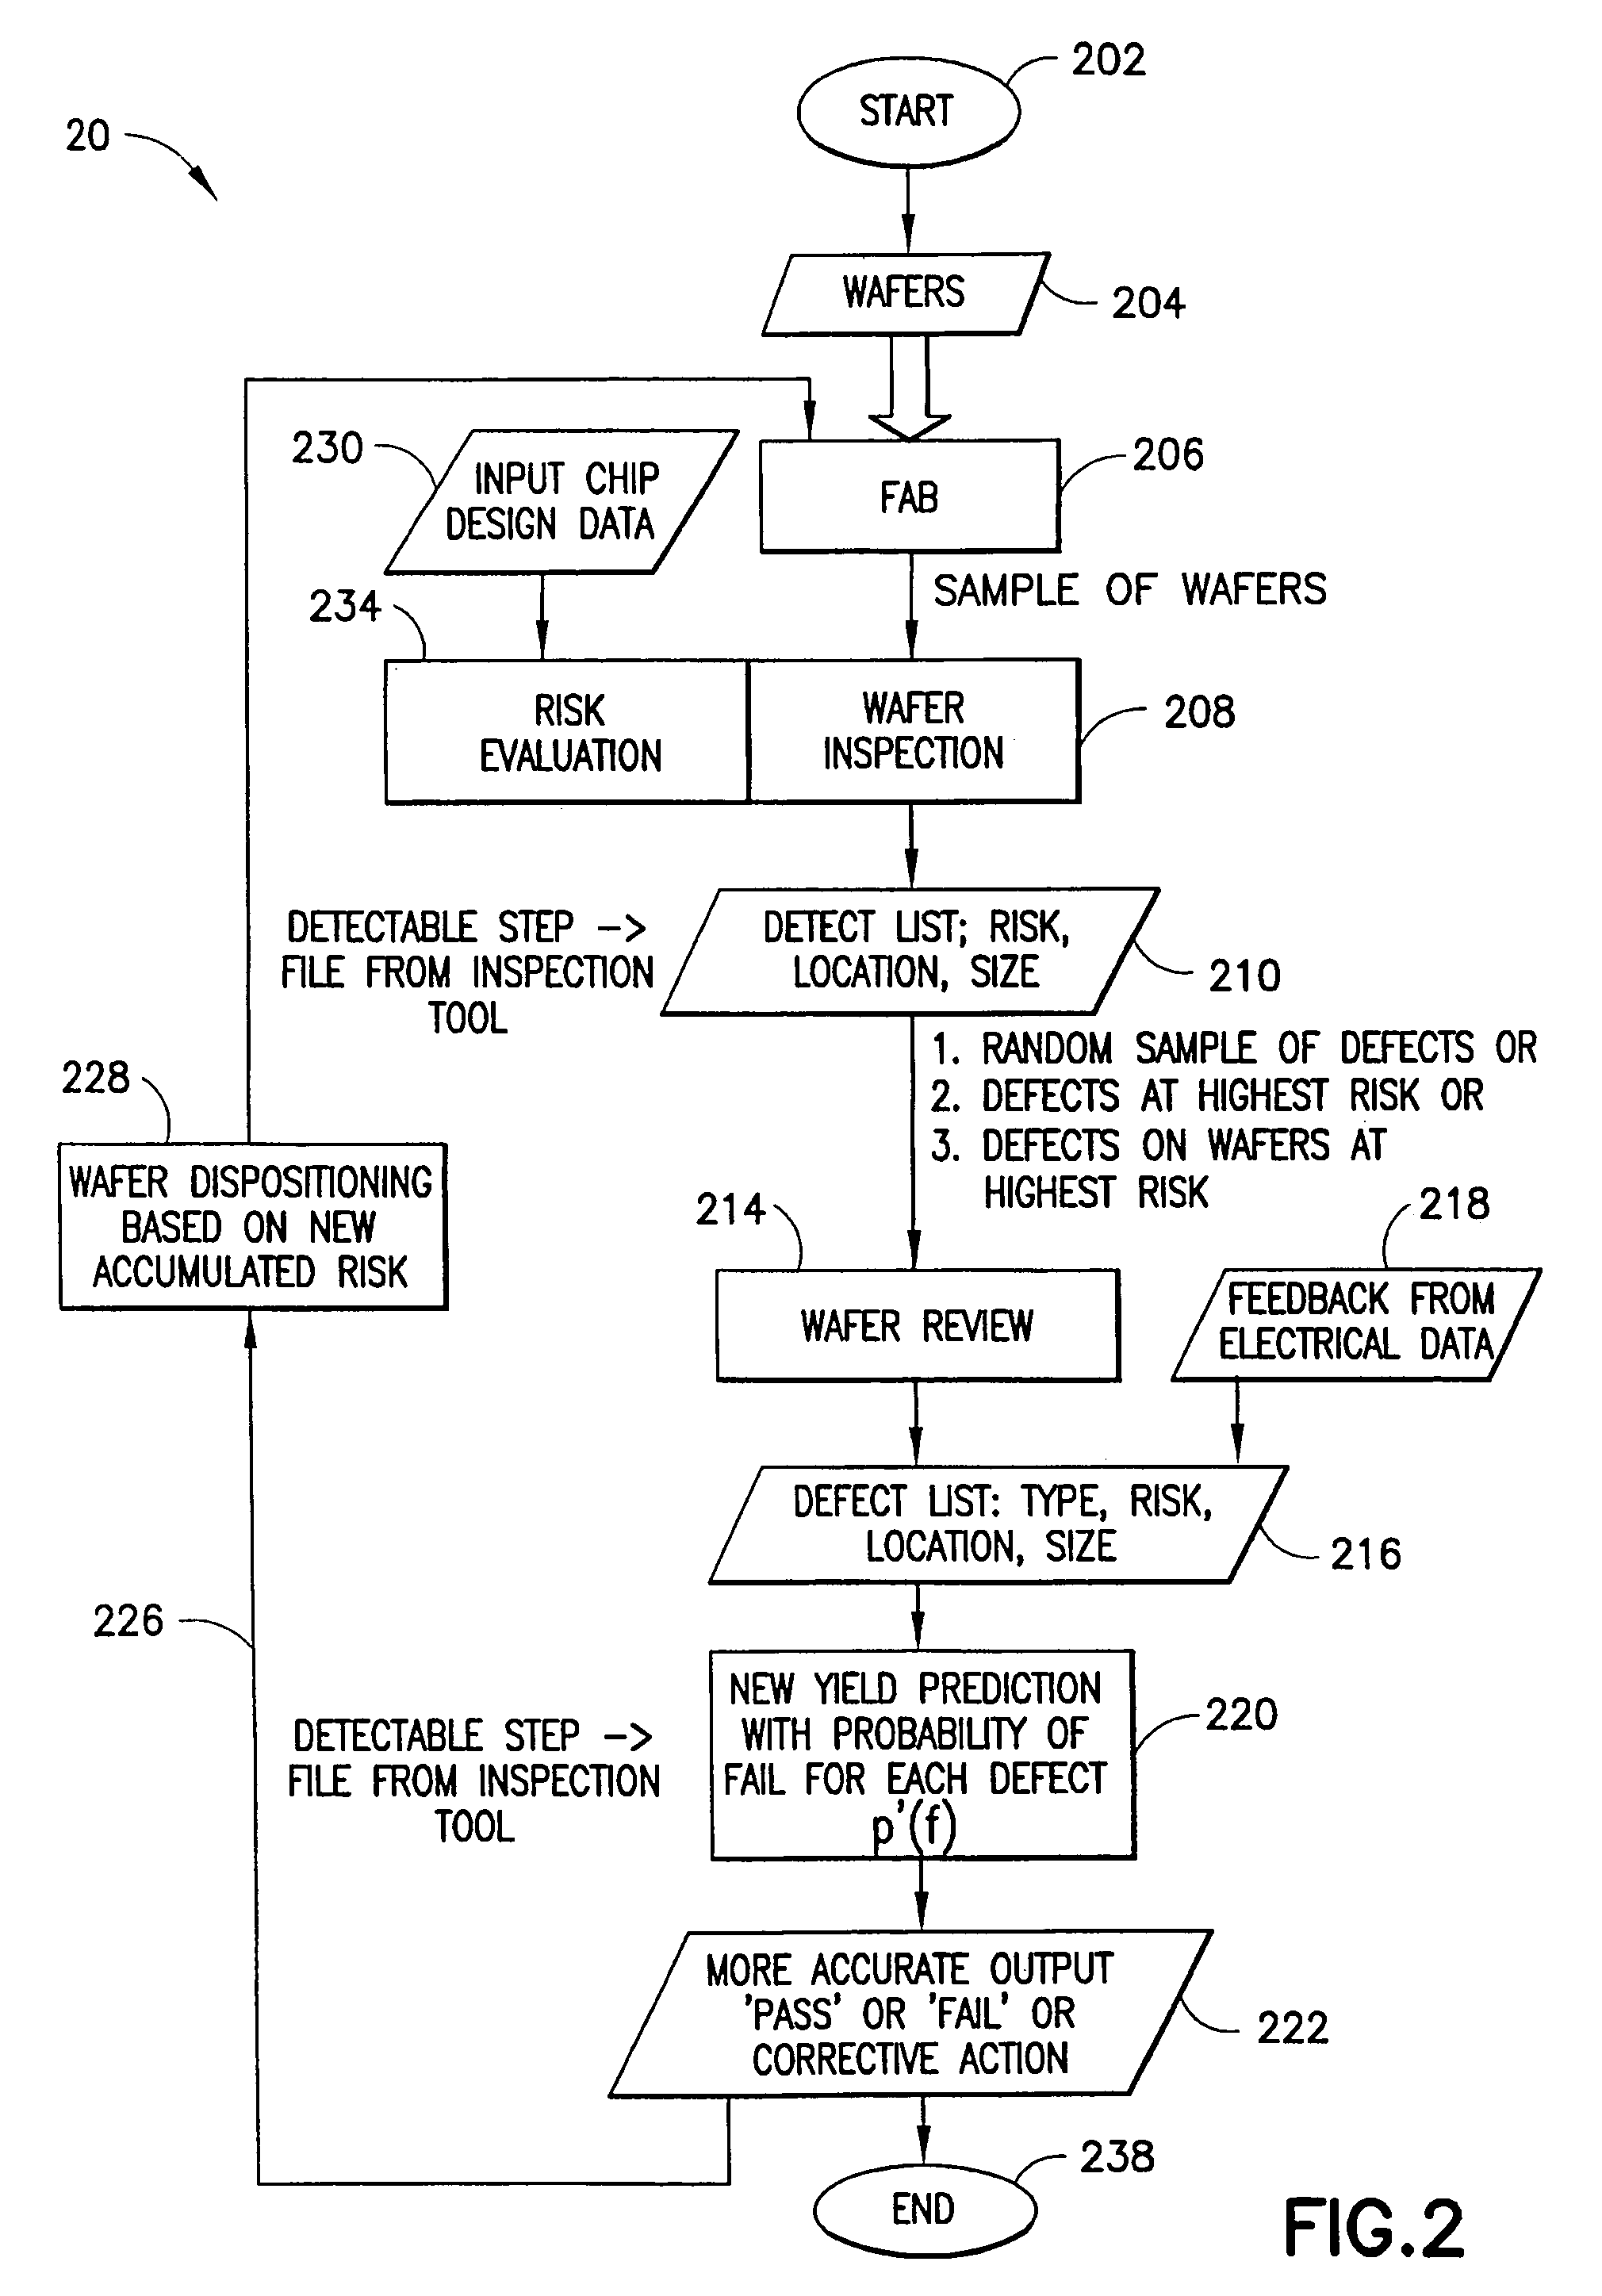 Design structure and system for identification of defects on circuits or other arrayed products